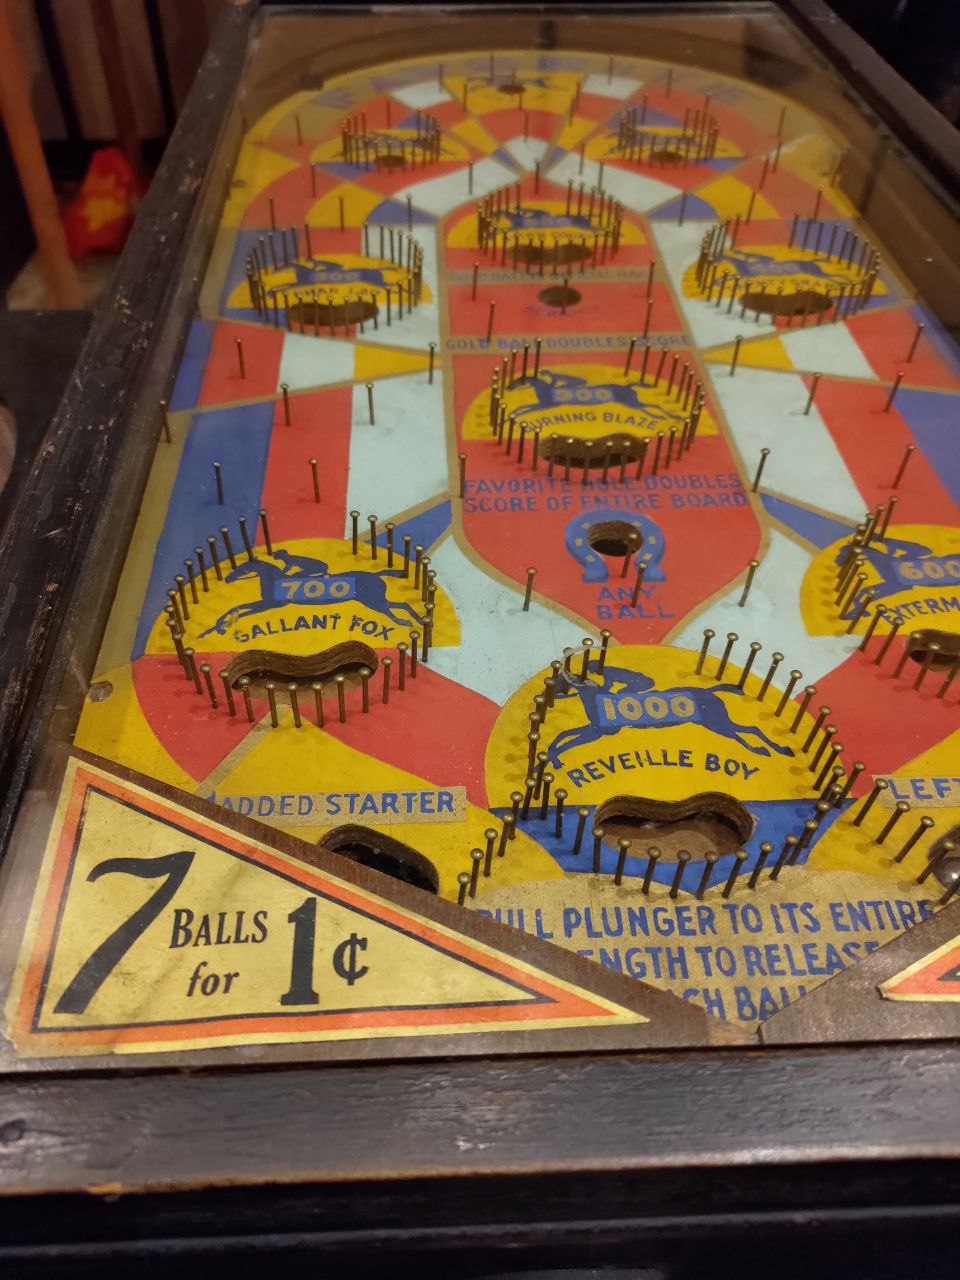 An old pinball machine. It has no flippers, as flippers were not added to pinball until much later. The focus of the image is a vintage sign on the pinball machine advertising 7 balls for only one cent.